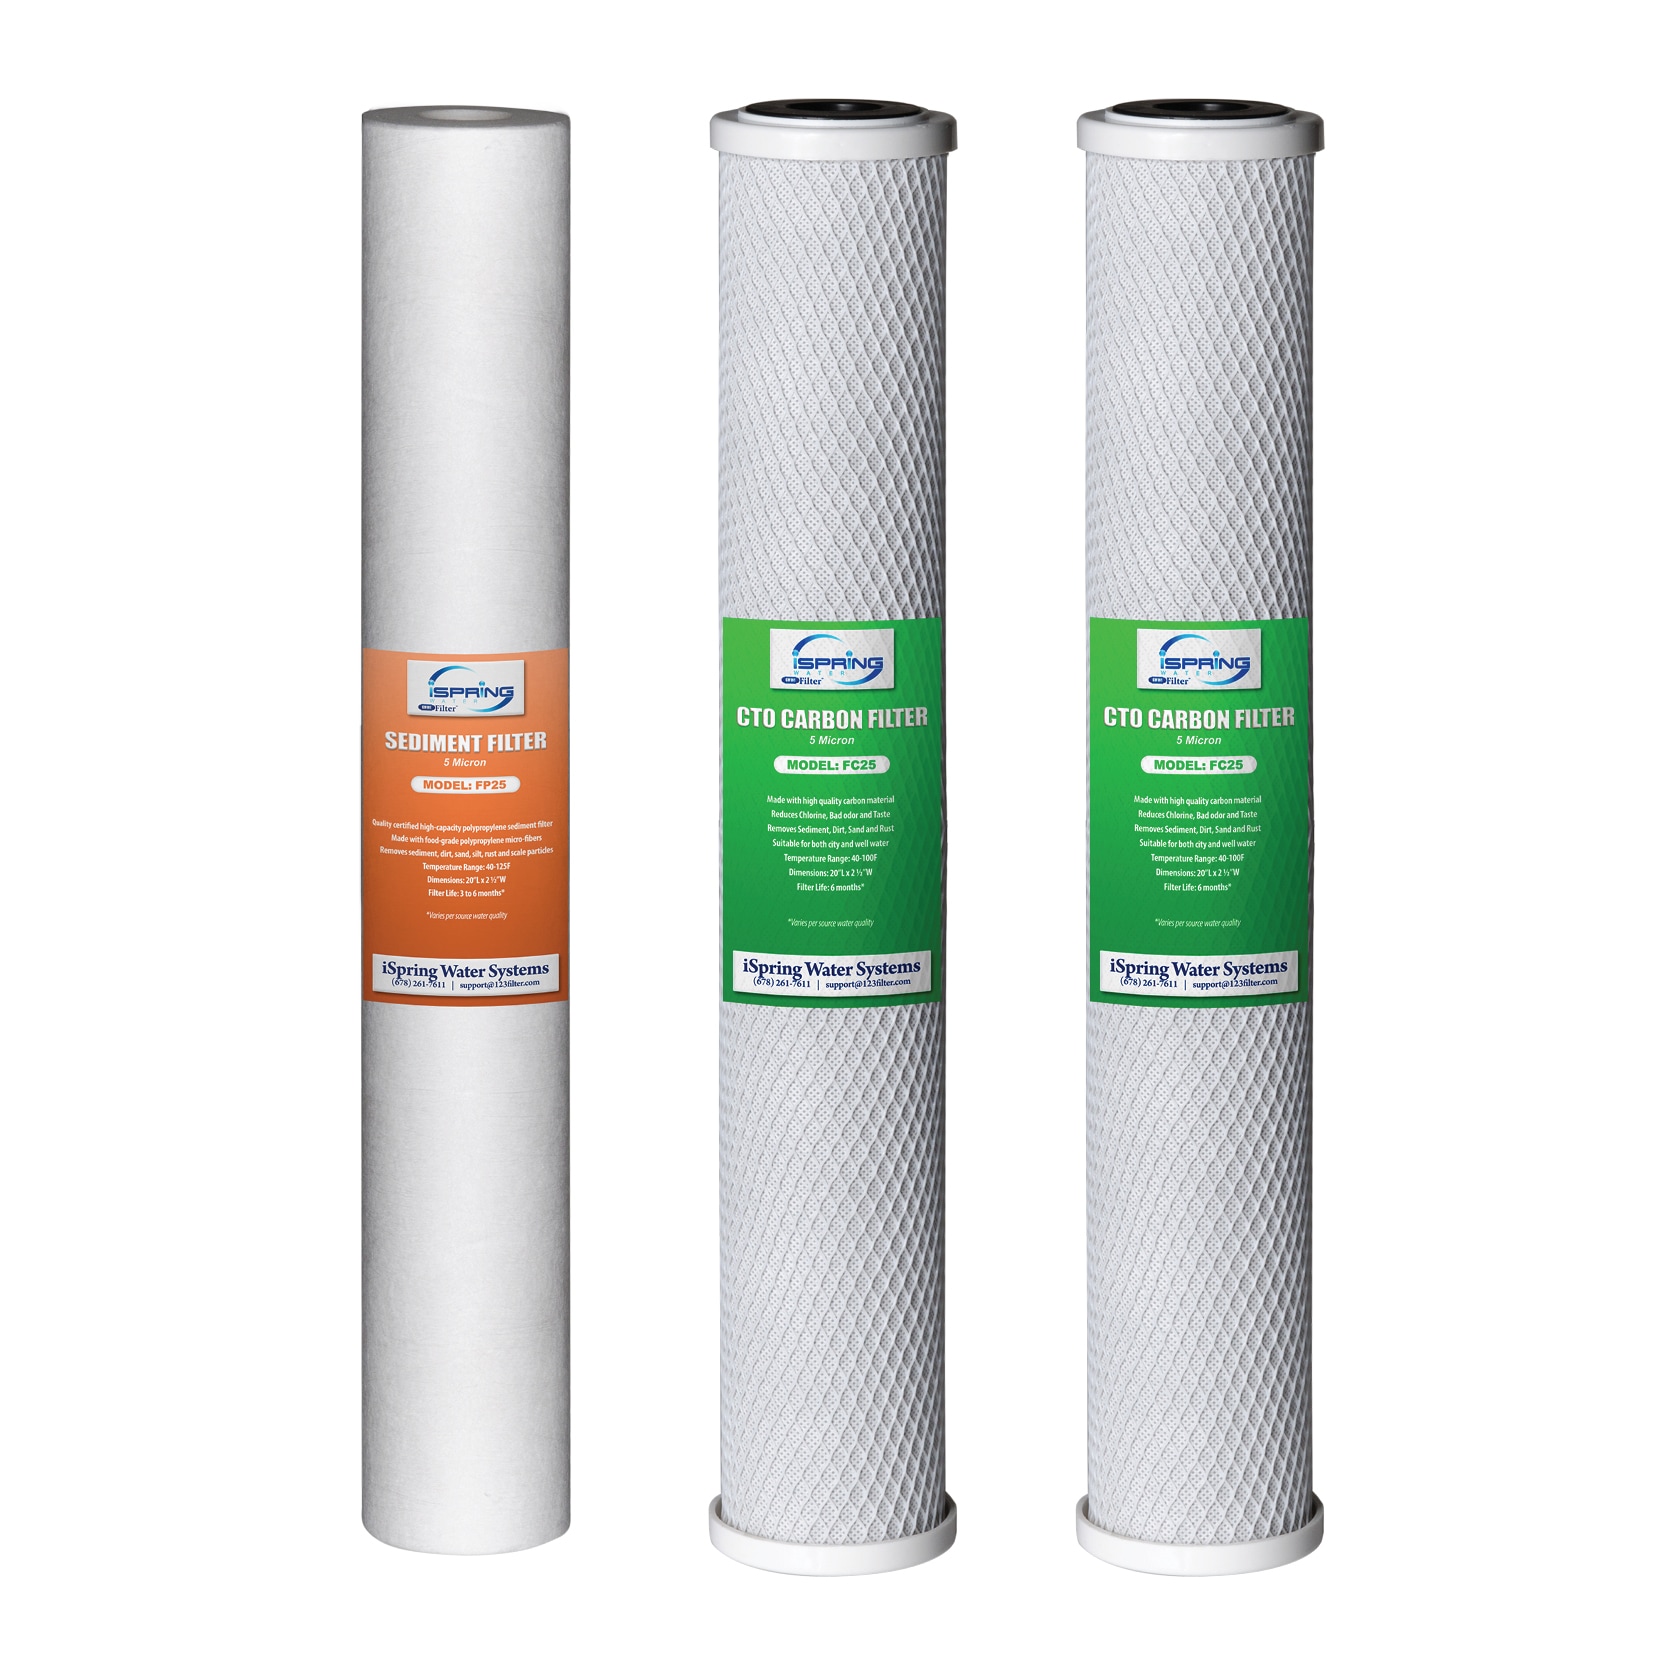 22-inch-tall-replacement-water-filters-cartridges-at-lowes